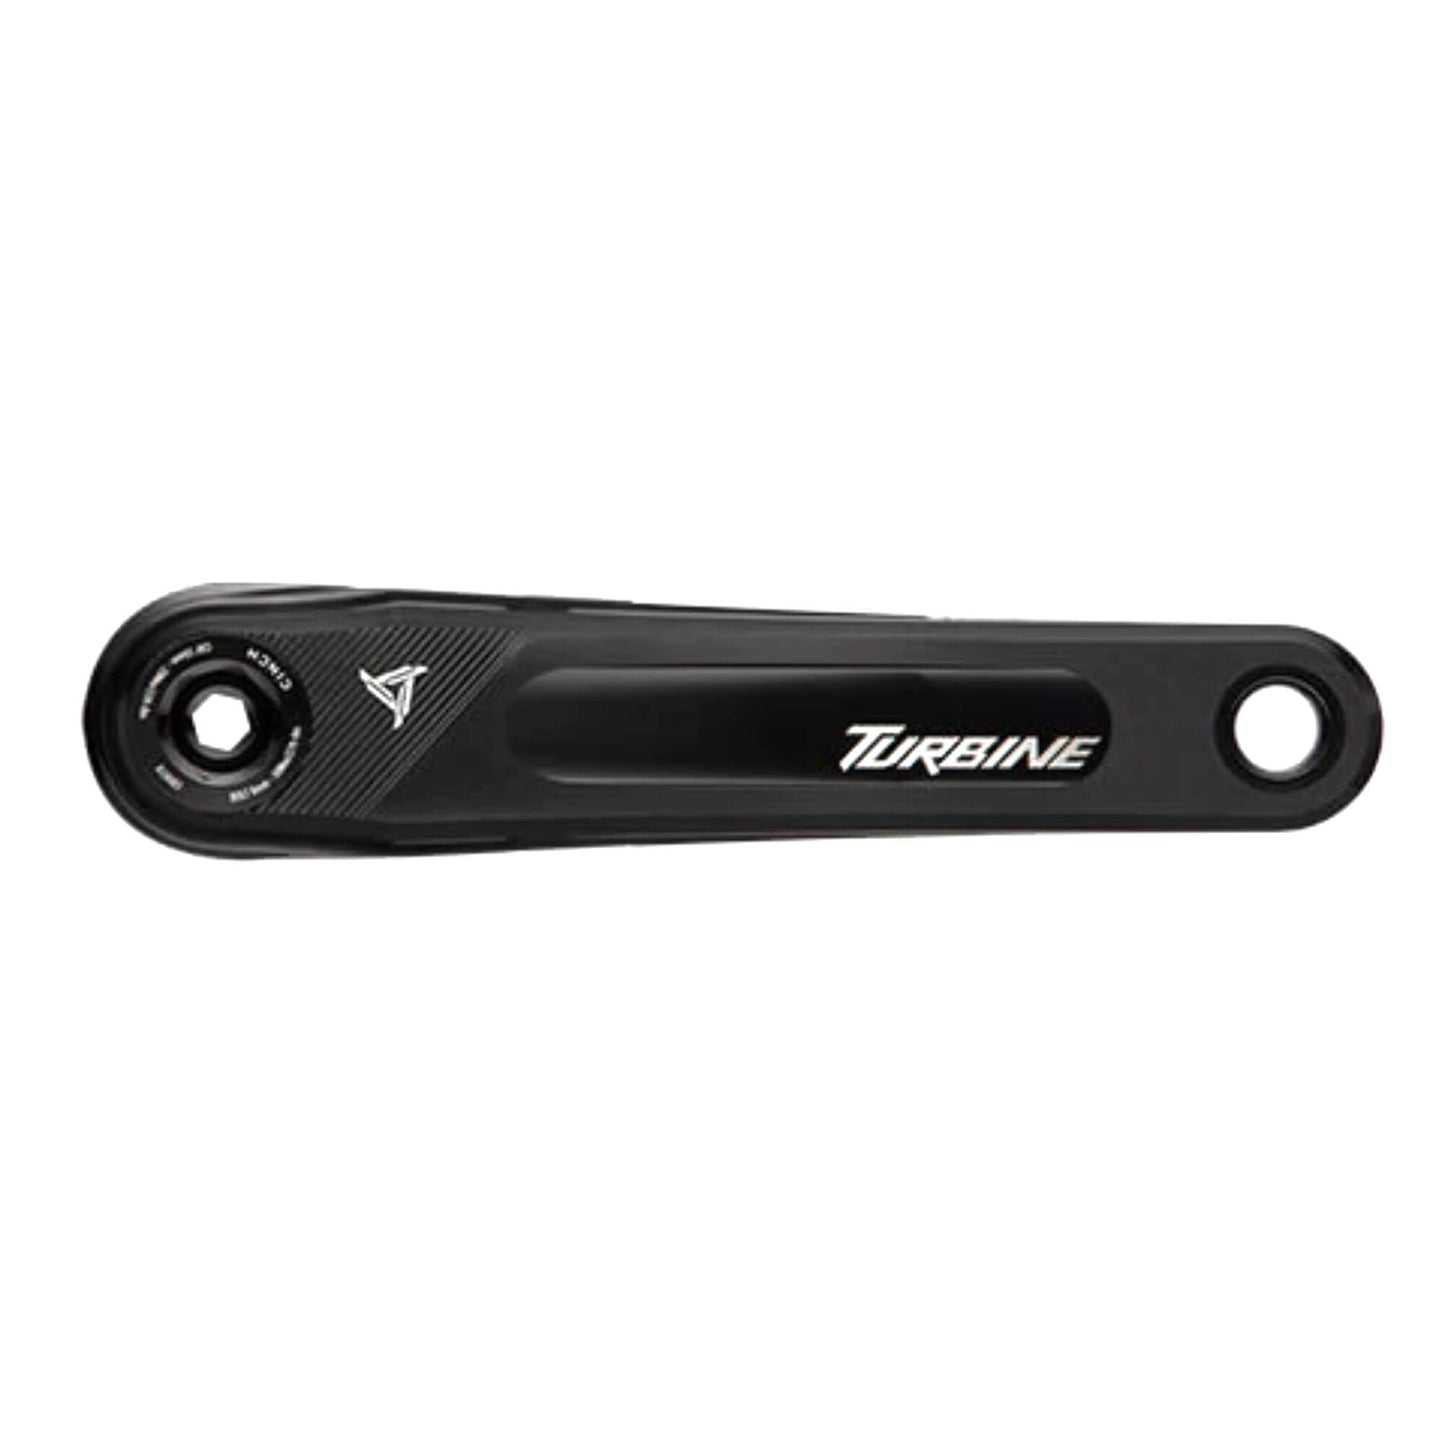 Race Face Turbine Cranks (Arms Only) 136mm Spindle Size - 175mm Length